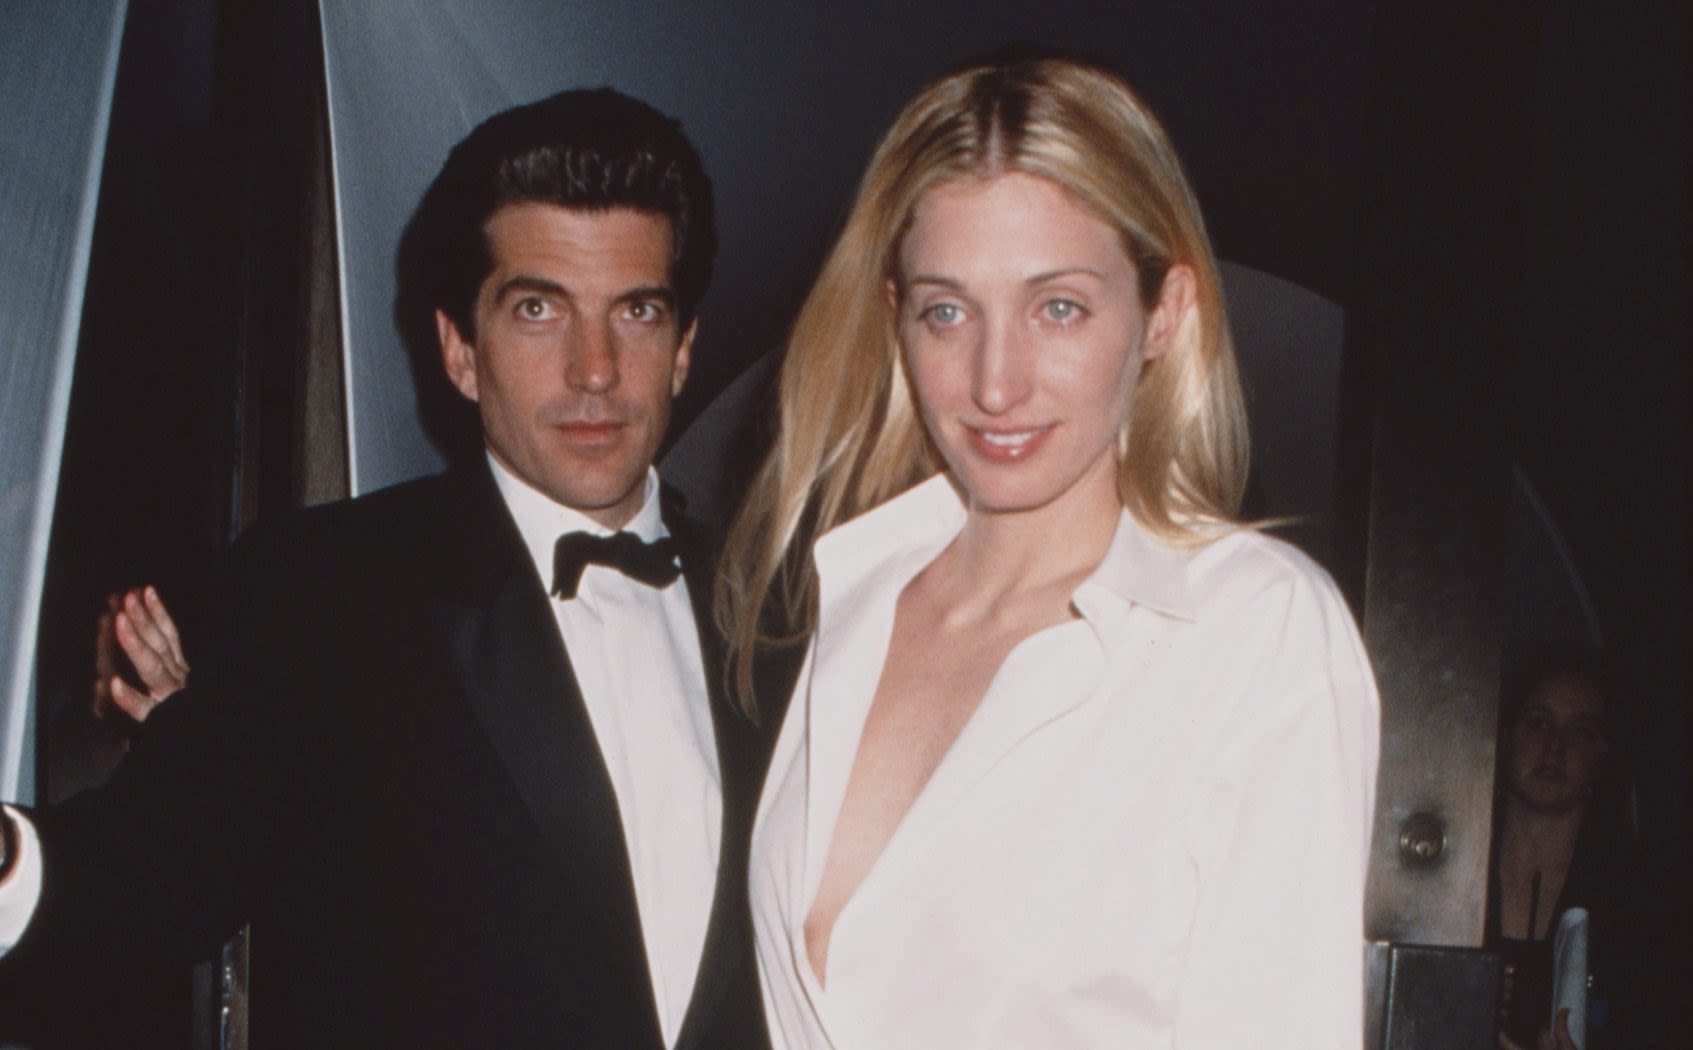 A new auction could prove Carolyn Bessette Kennedy was ‘the ultimate fashion icon’